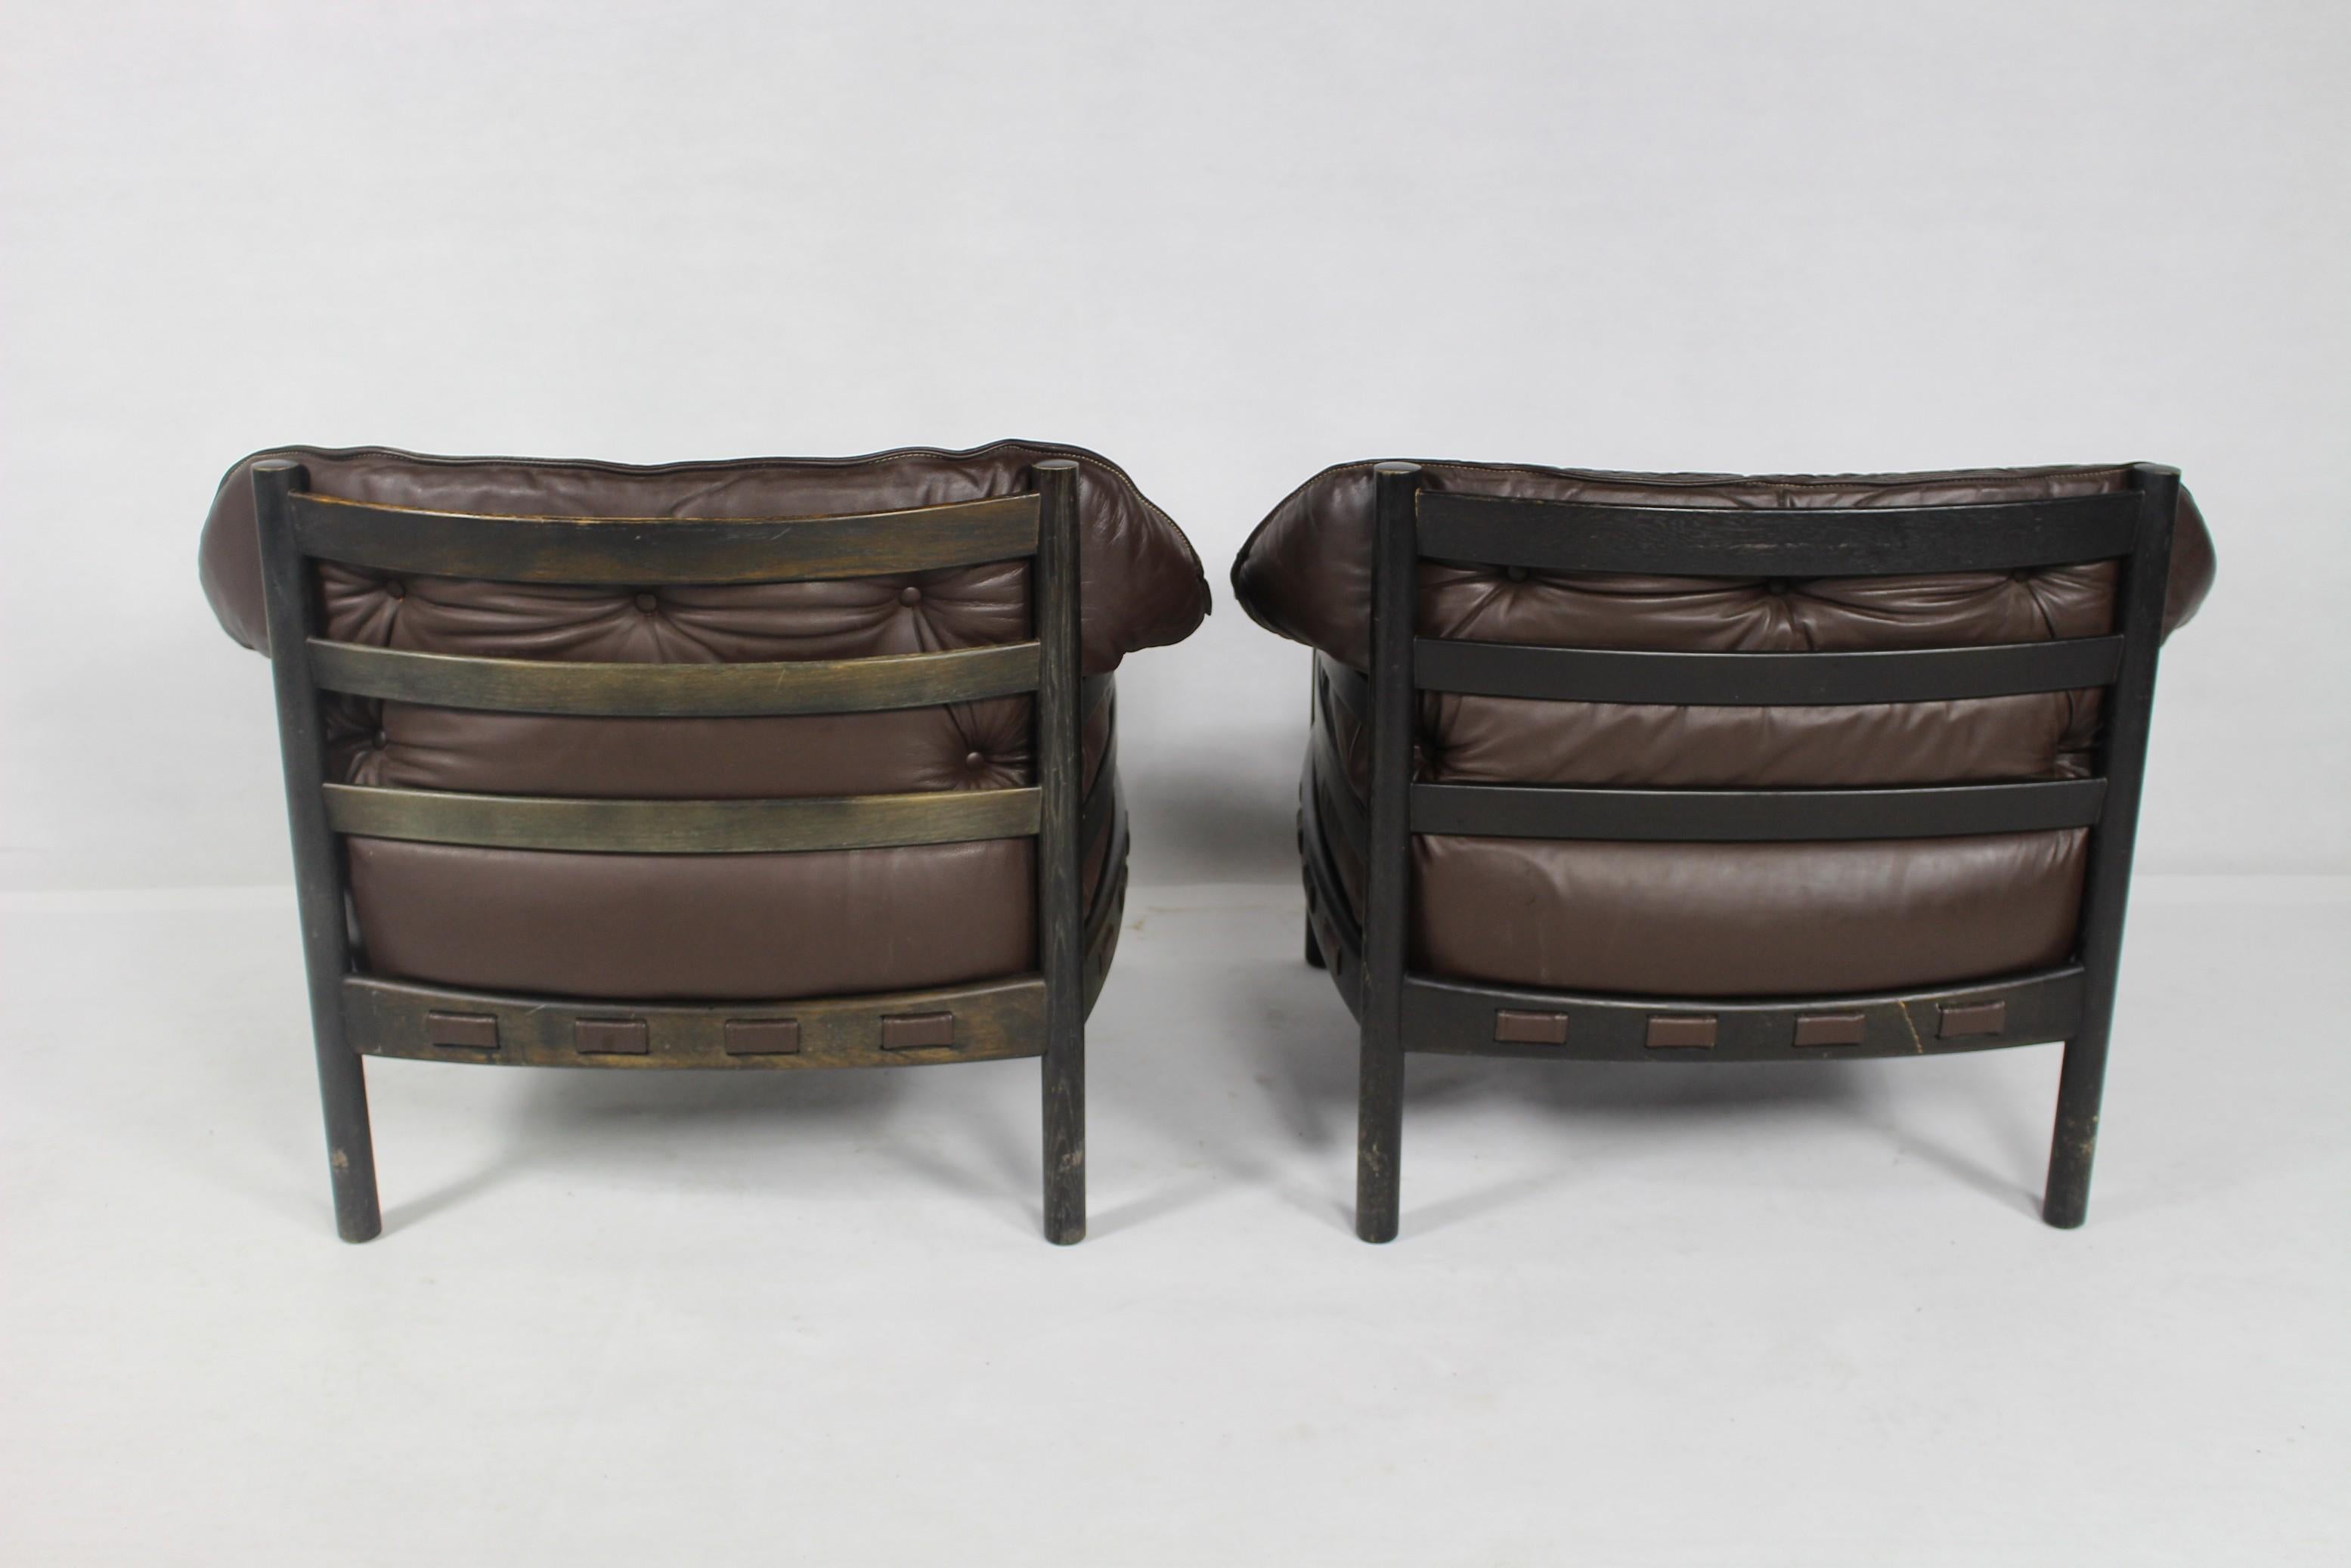 1960s Sven Ellekaer Brown Leather Chairs For Coja  For Sale 4